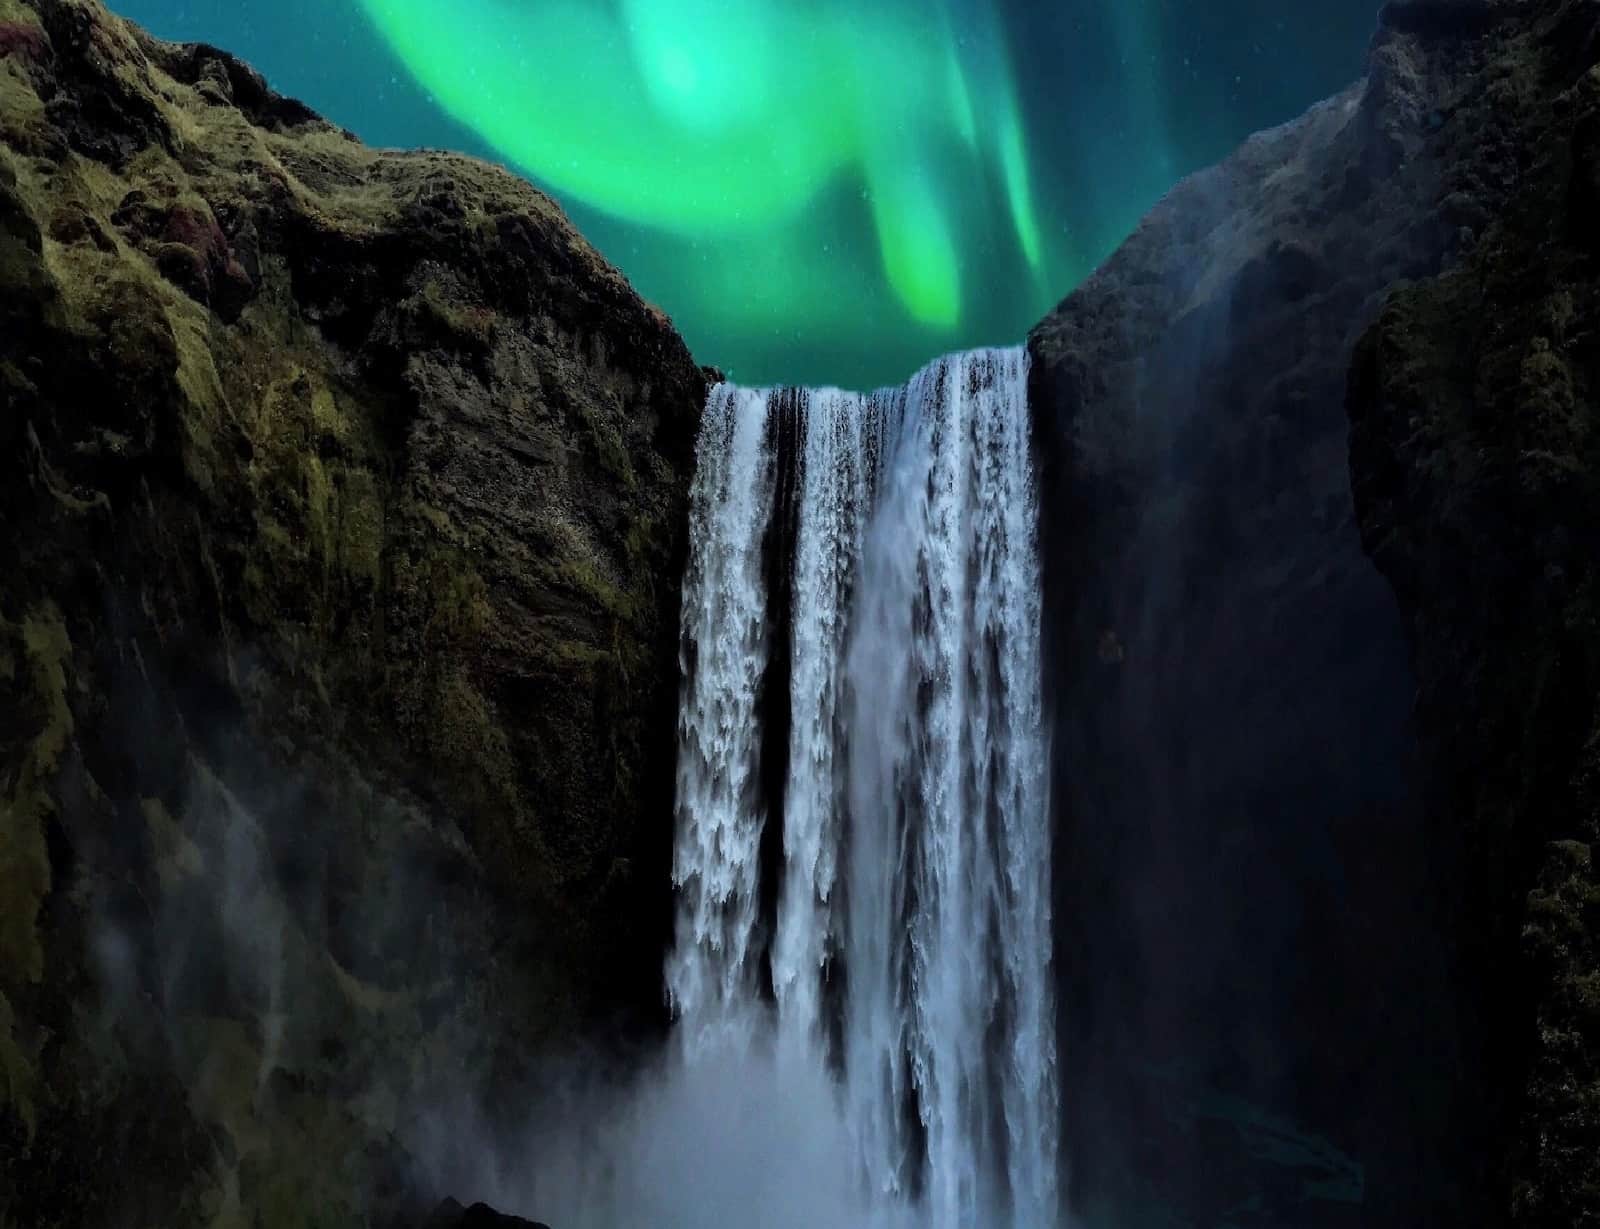 The Skogafoss waterfall in Iceland under the Northern Lights